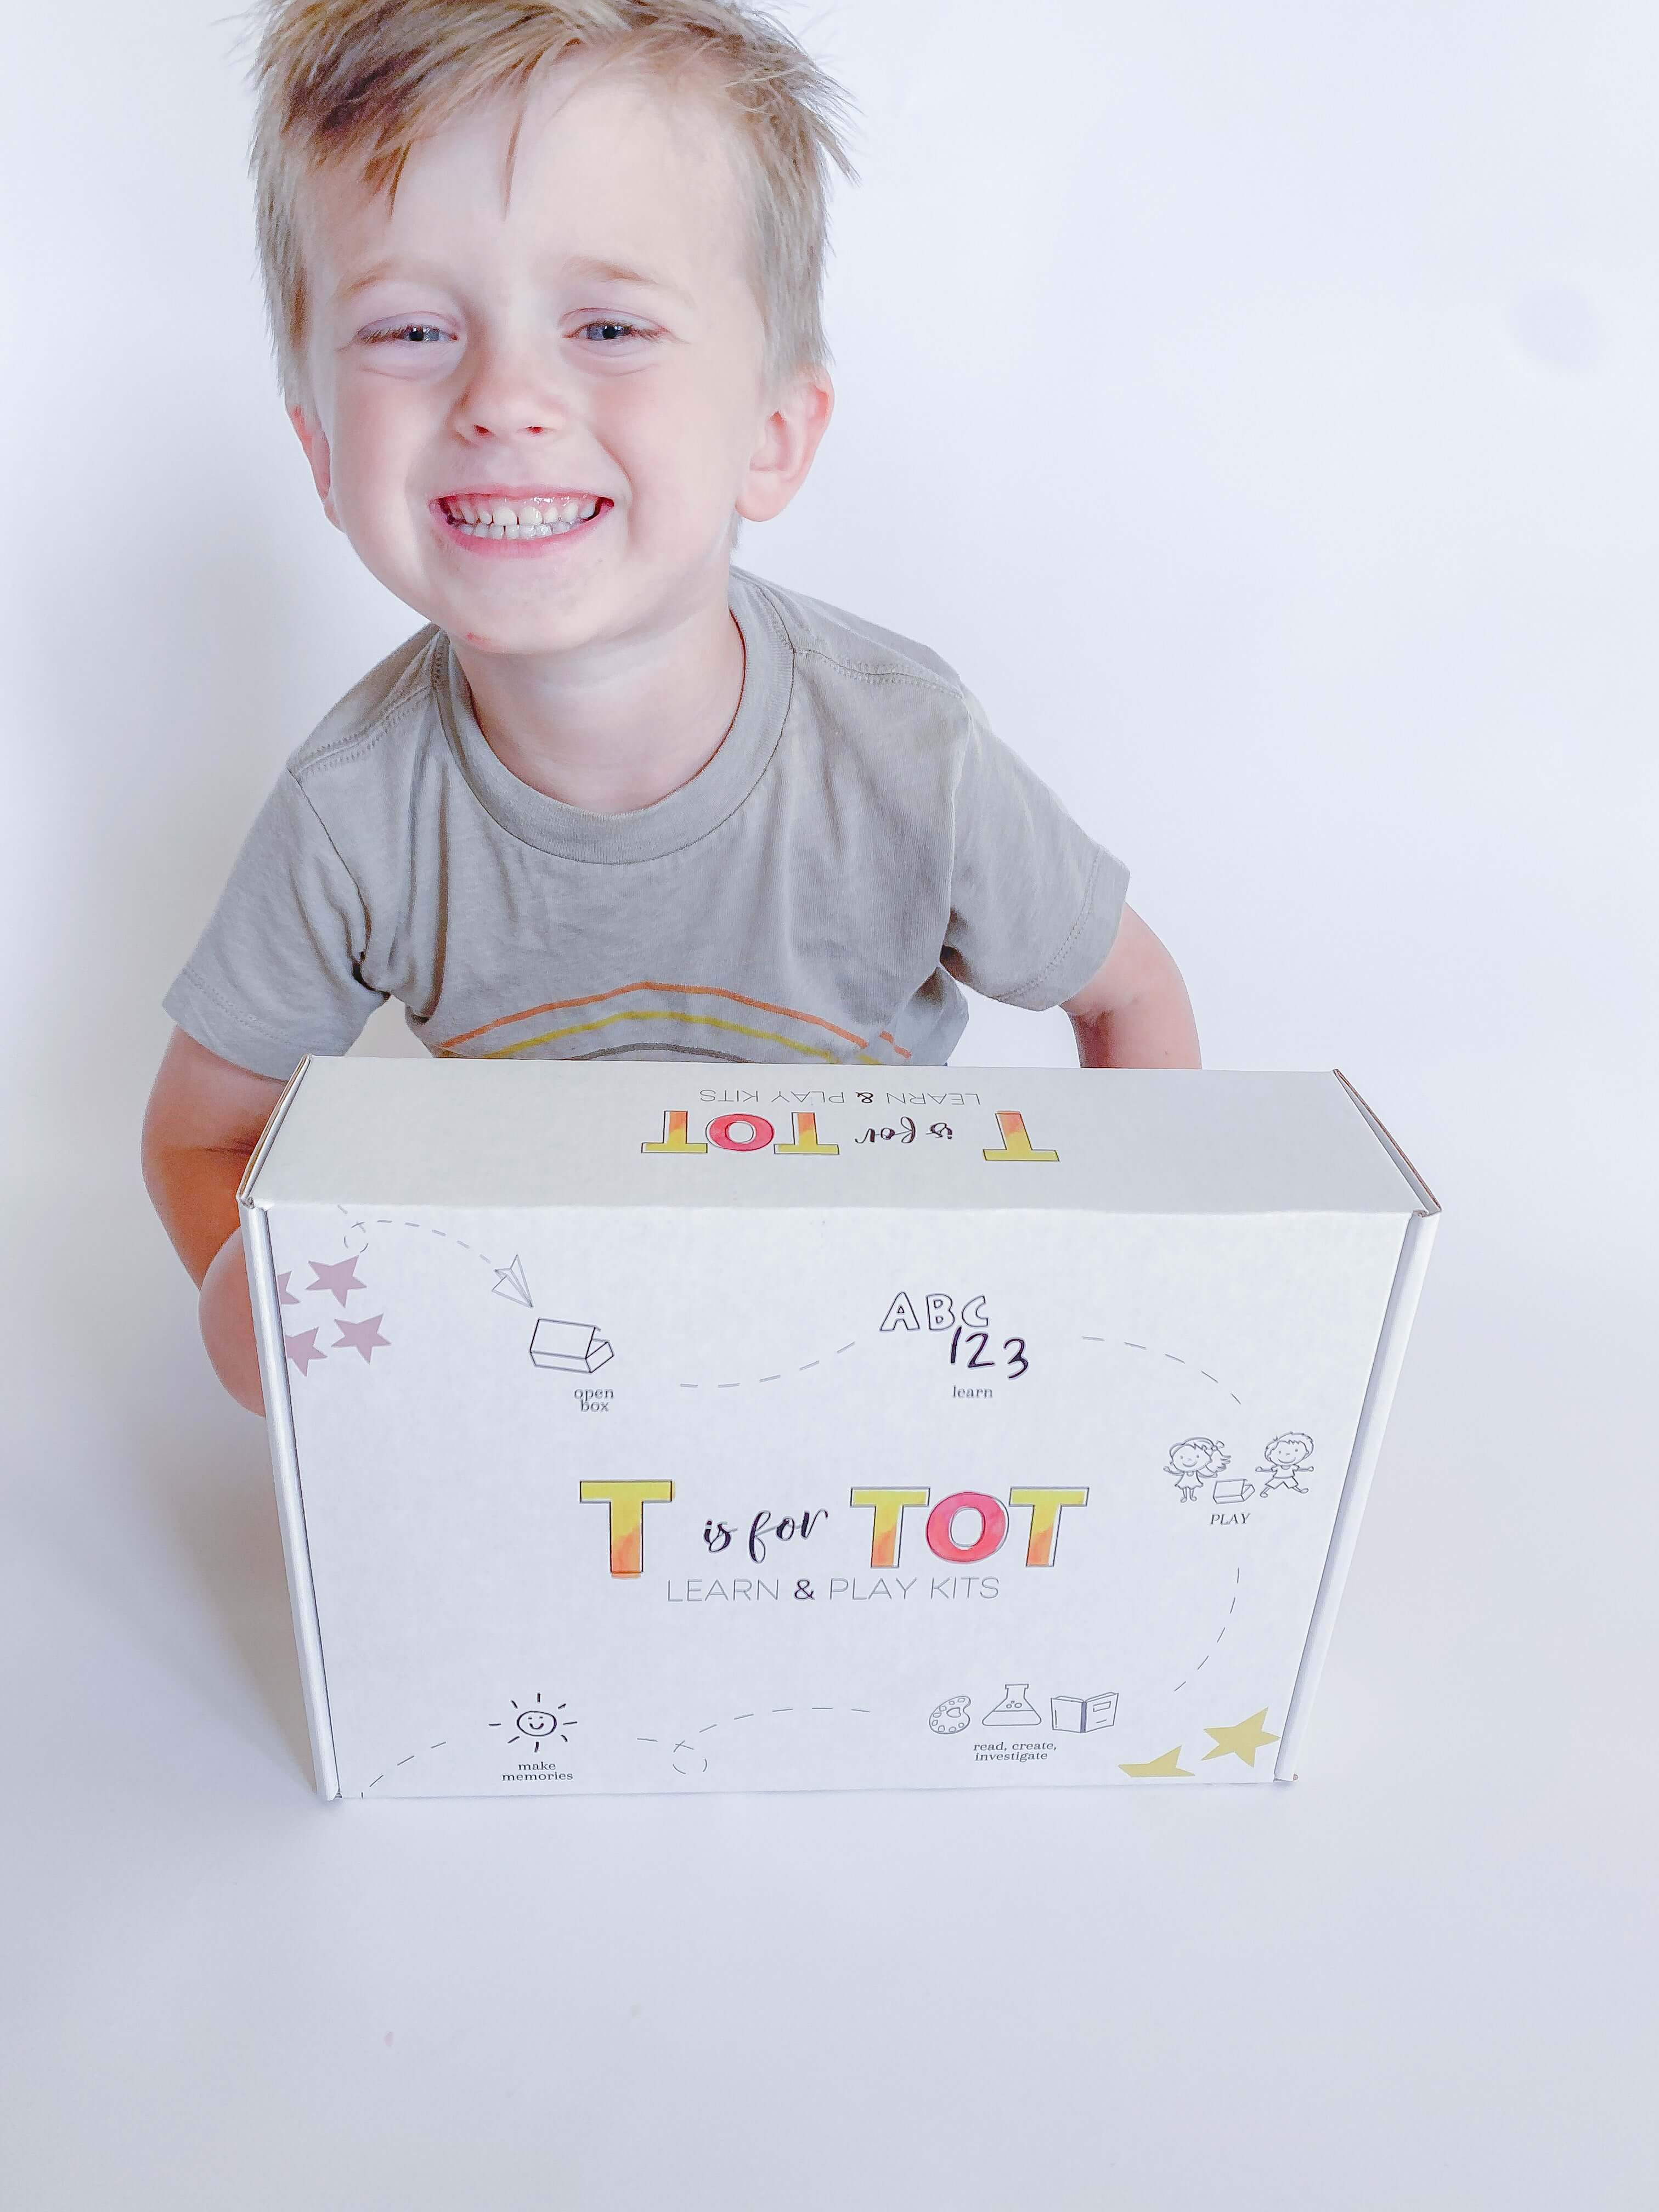 T Is For Tot Learn & Play Kit for ages 3-6.